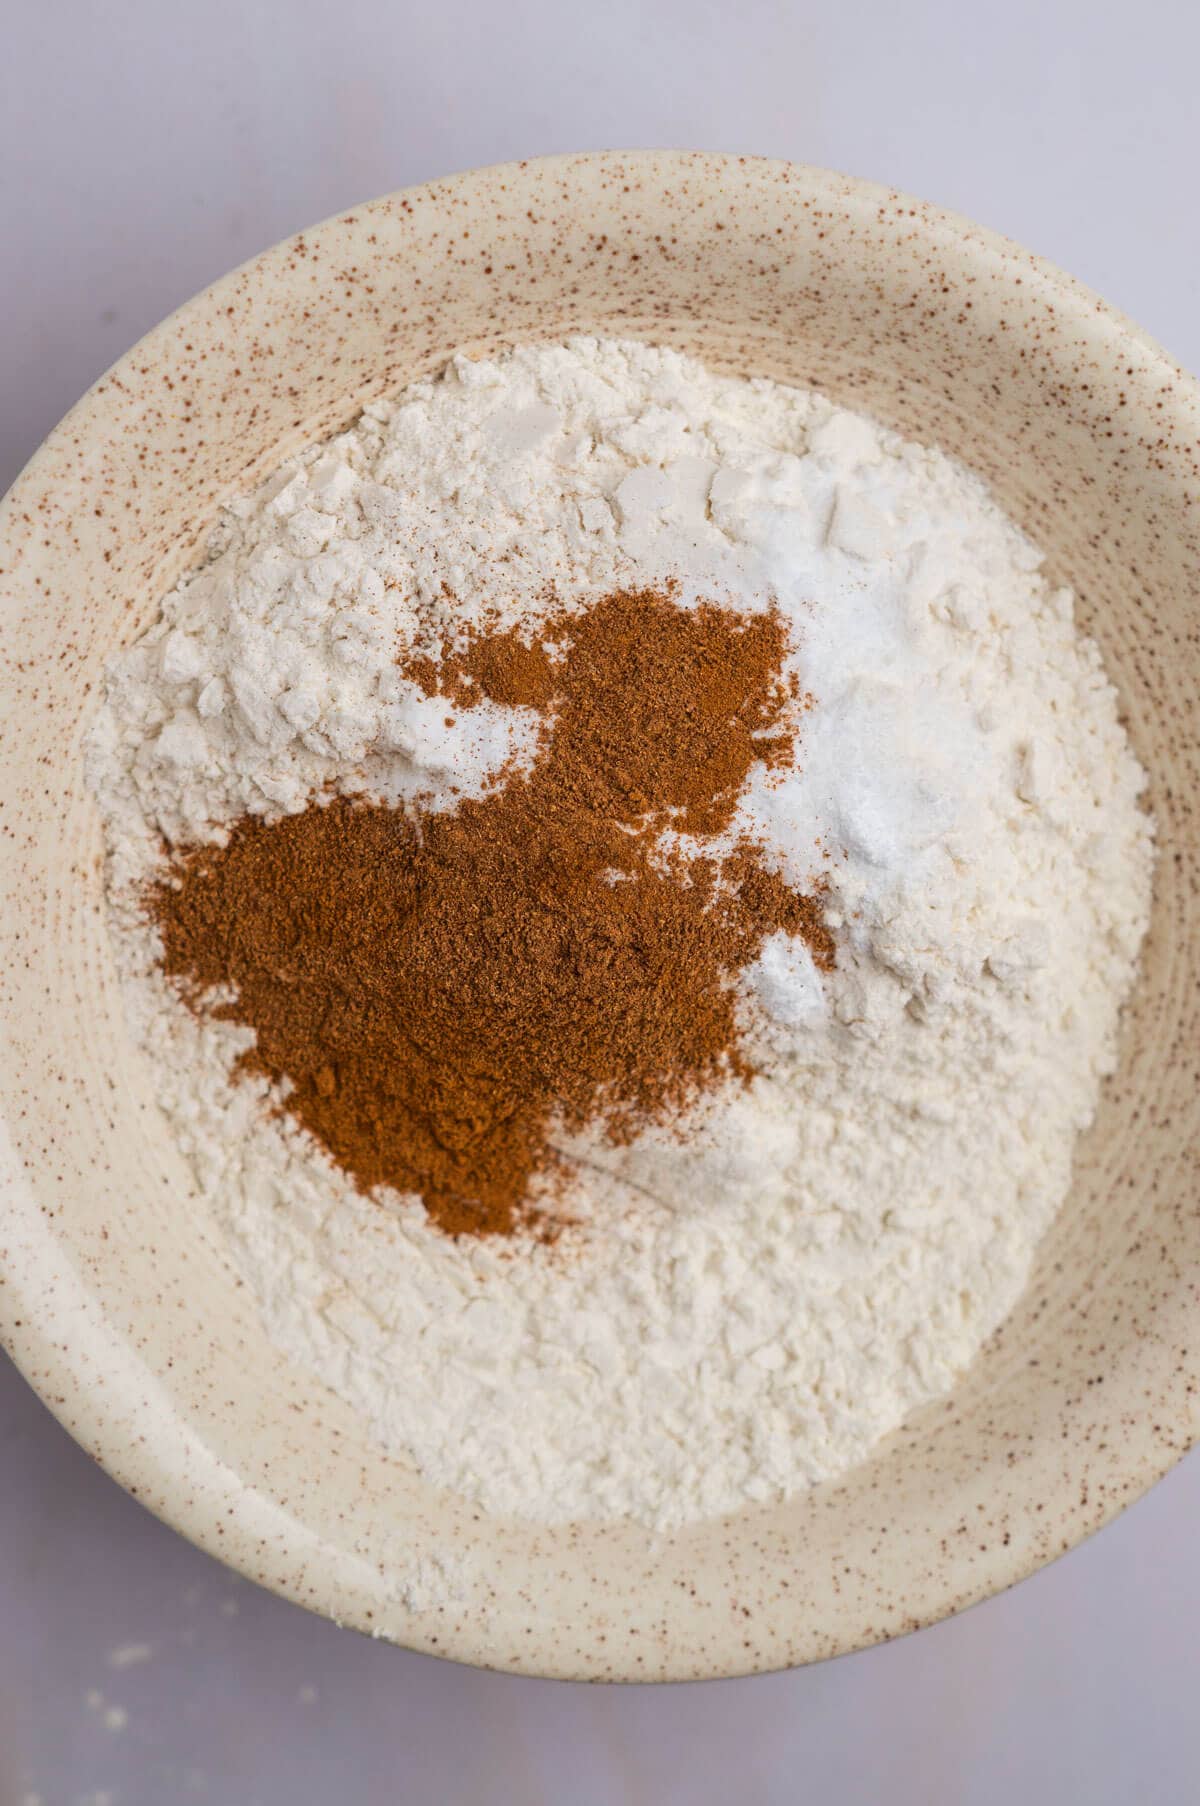 A bowl with the dry ingredients needed for the spice cake.